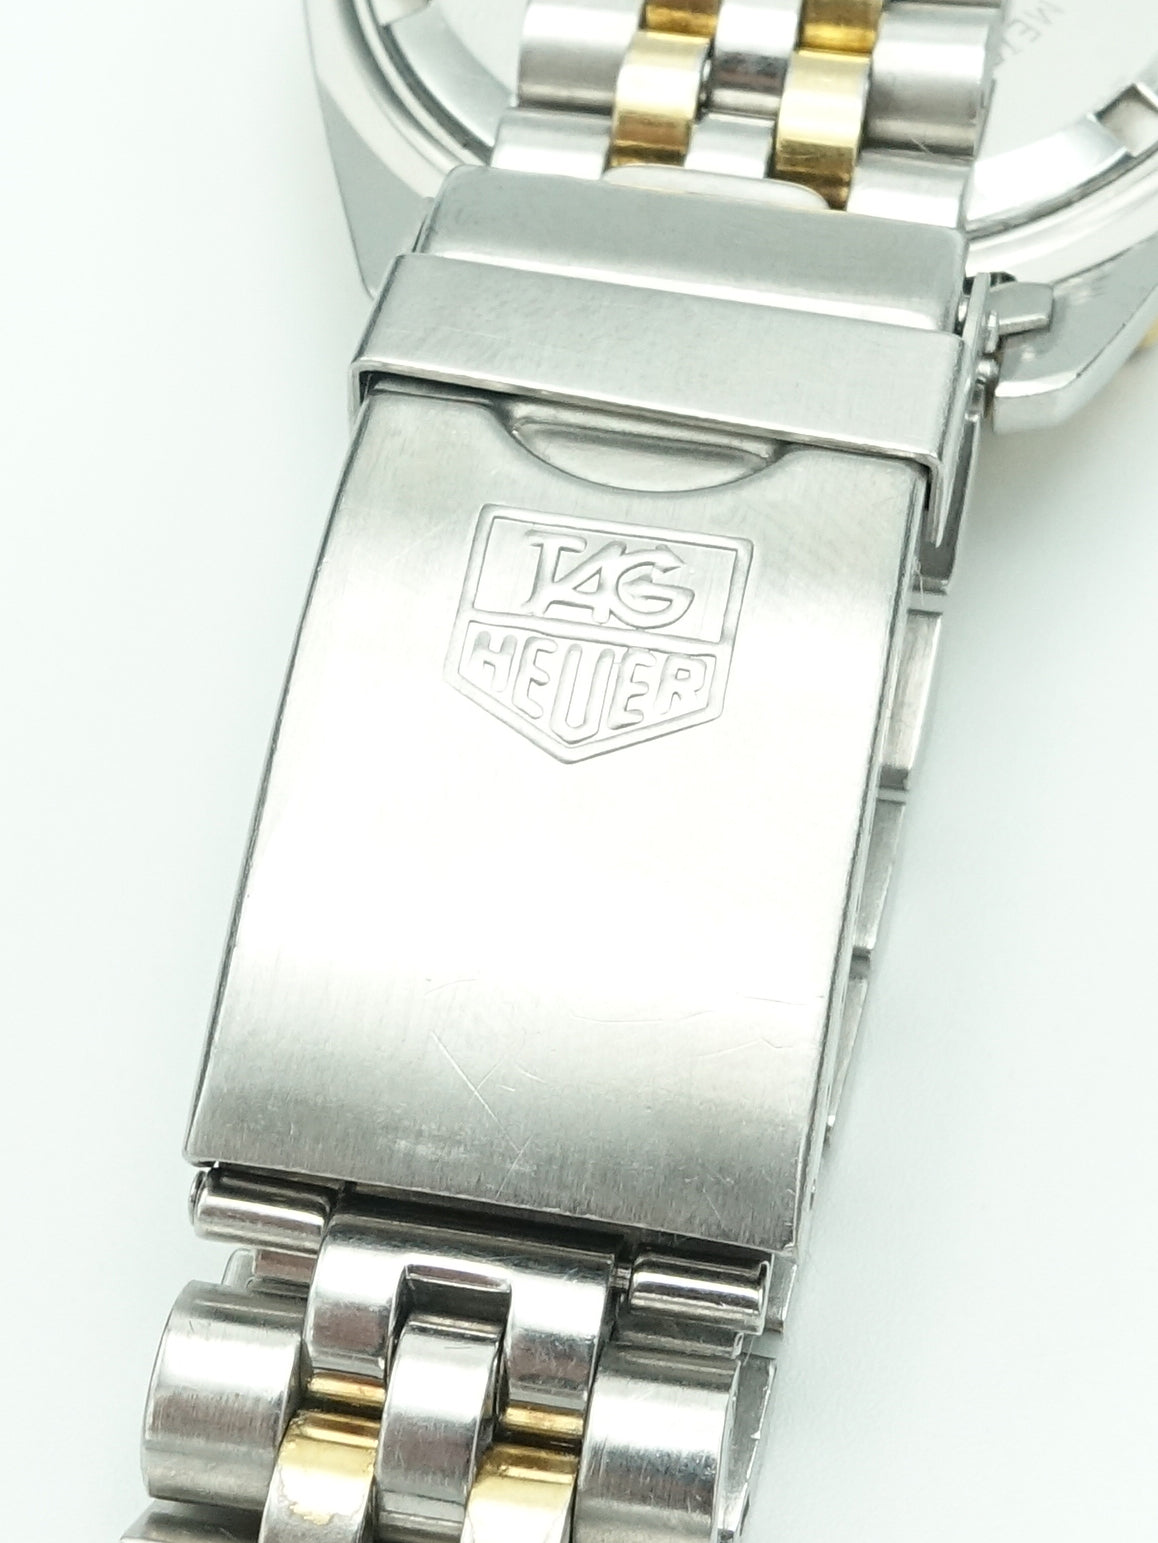 Tag Heuer 1000 Ref. 980.020D